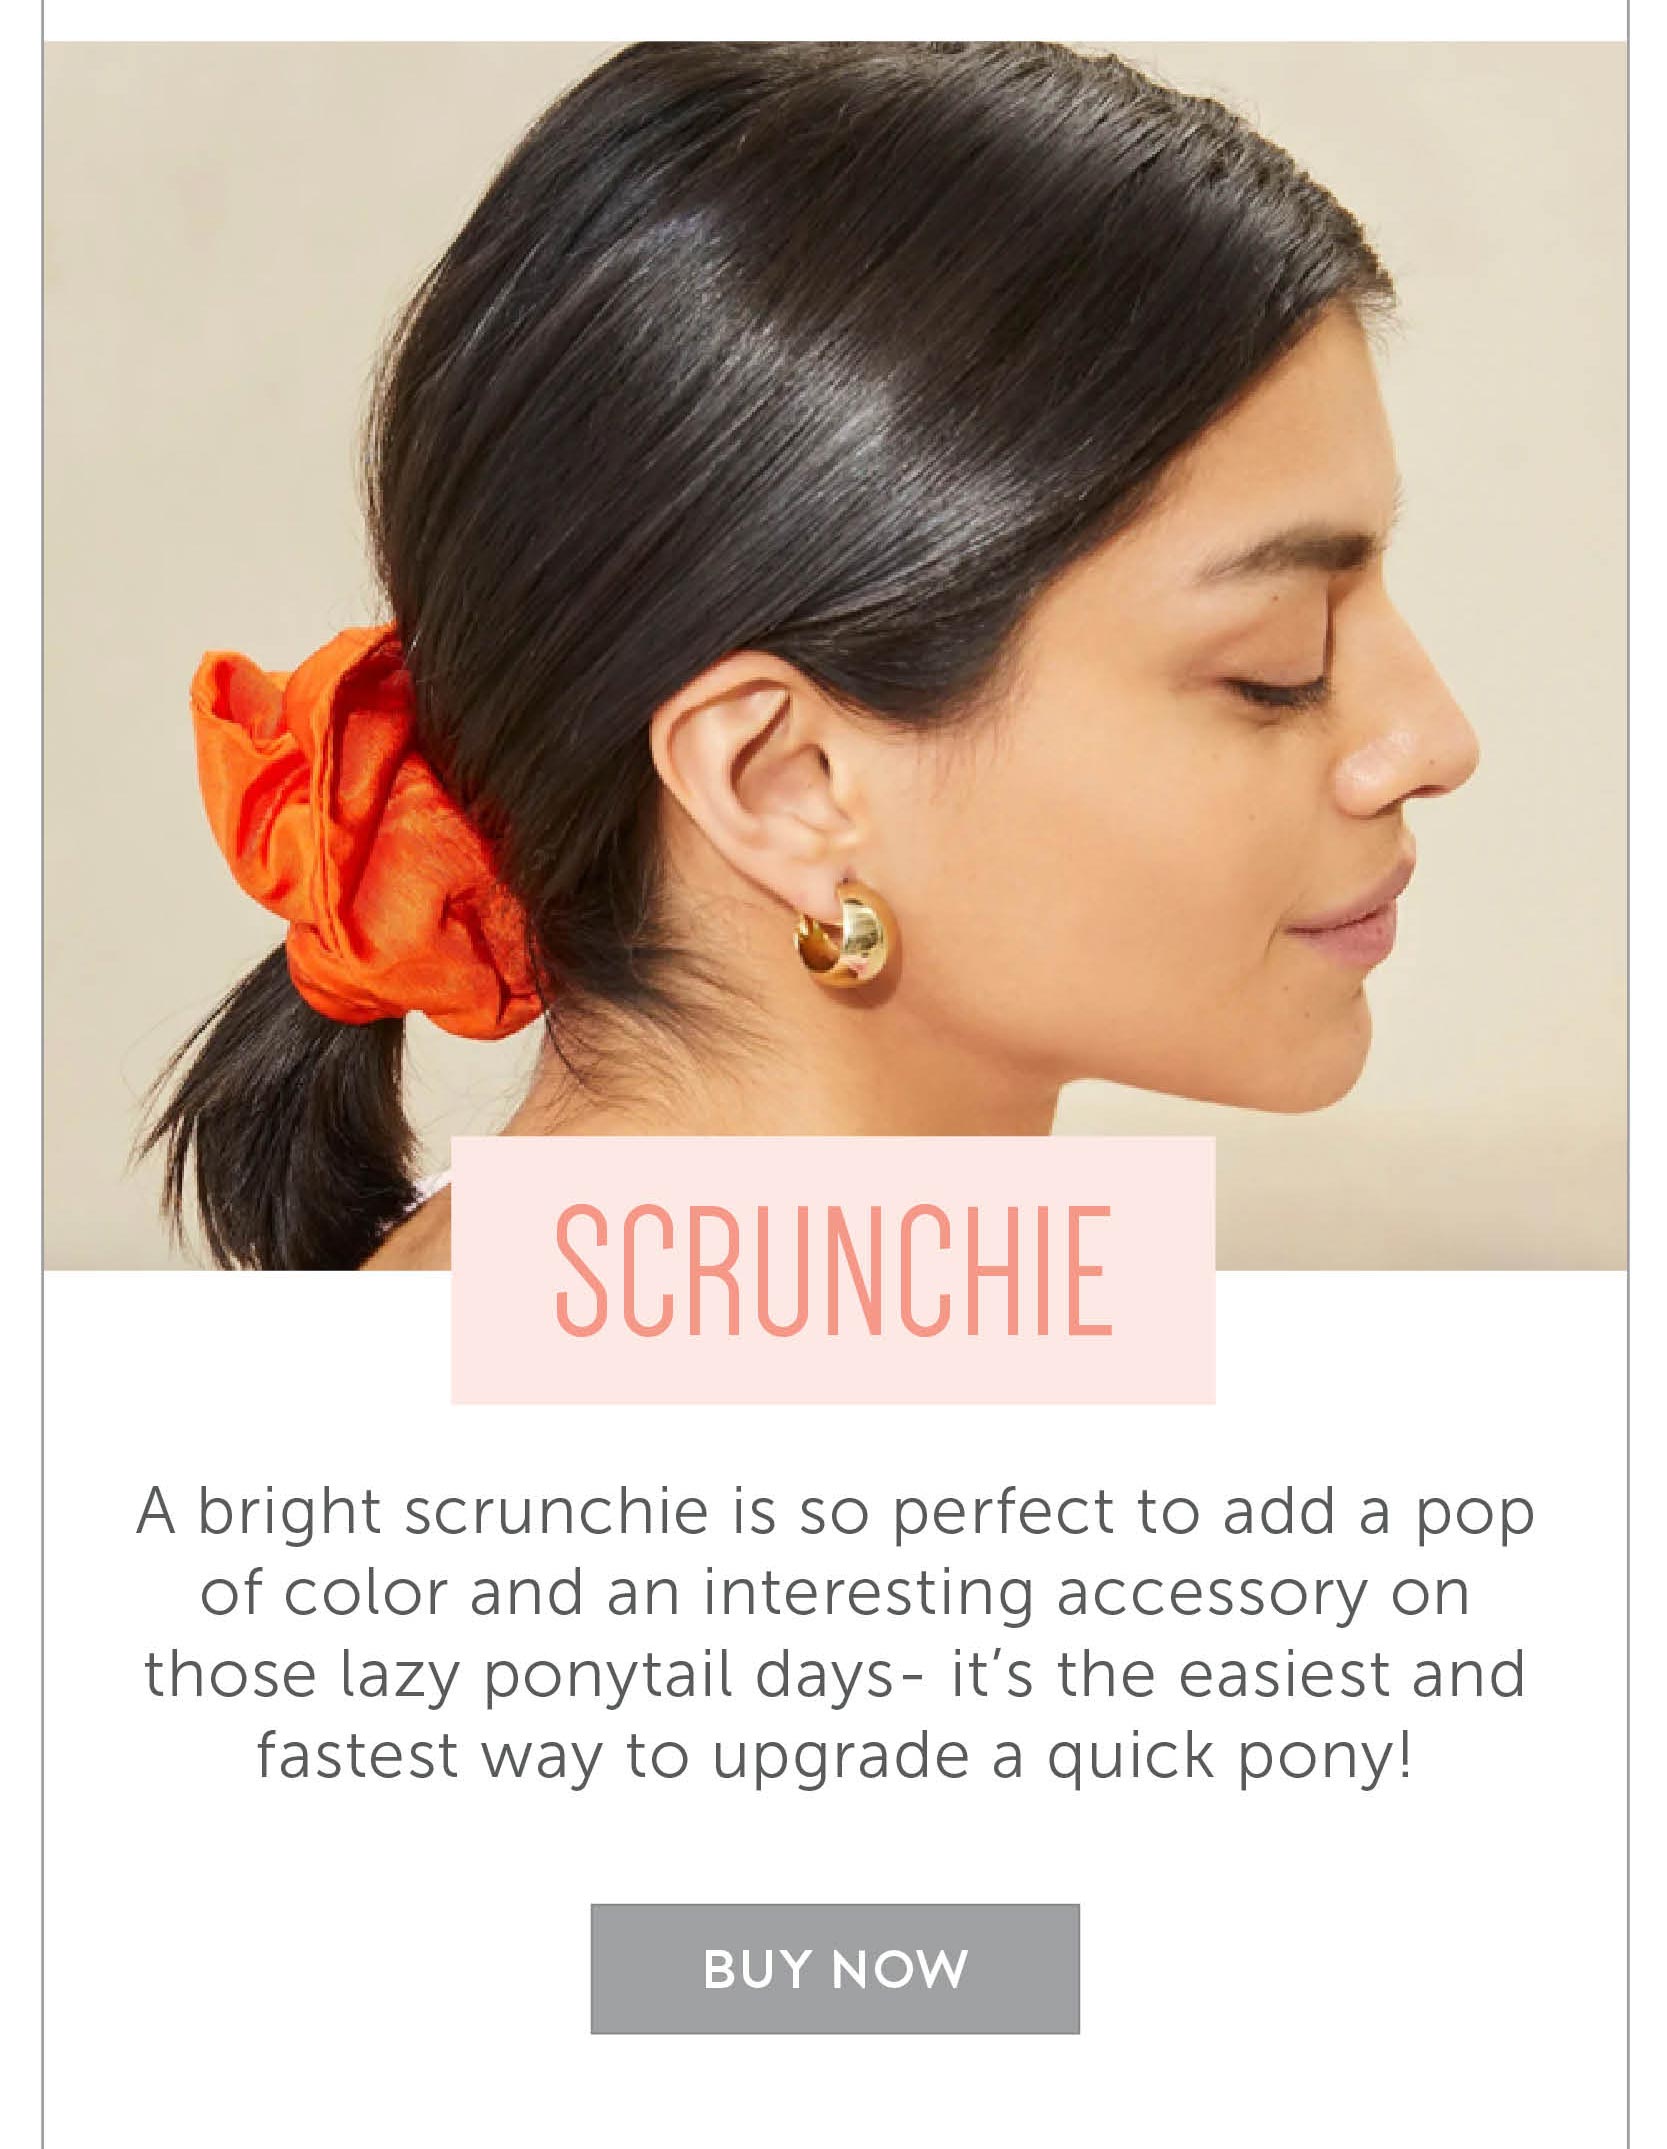 Scrunchie A bright scrunchie is so perfect to add a pop of color and an interesting accessory on those lazy ponytail days- it’s the easiest and fastest way to upgrade a quick pony!